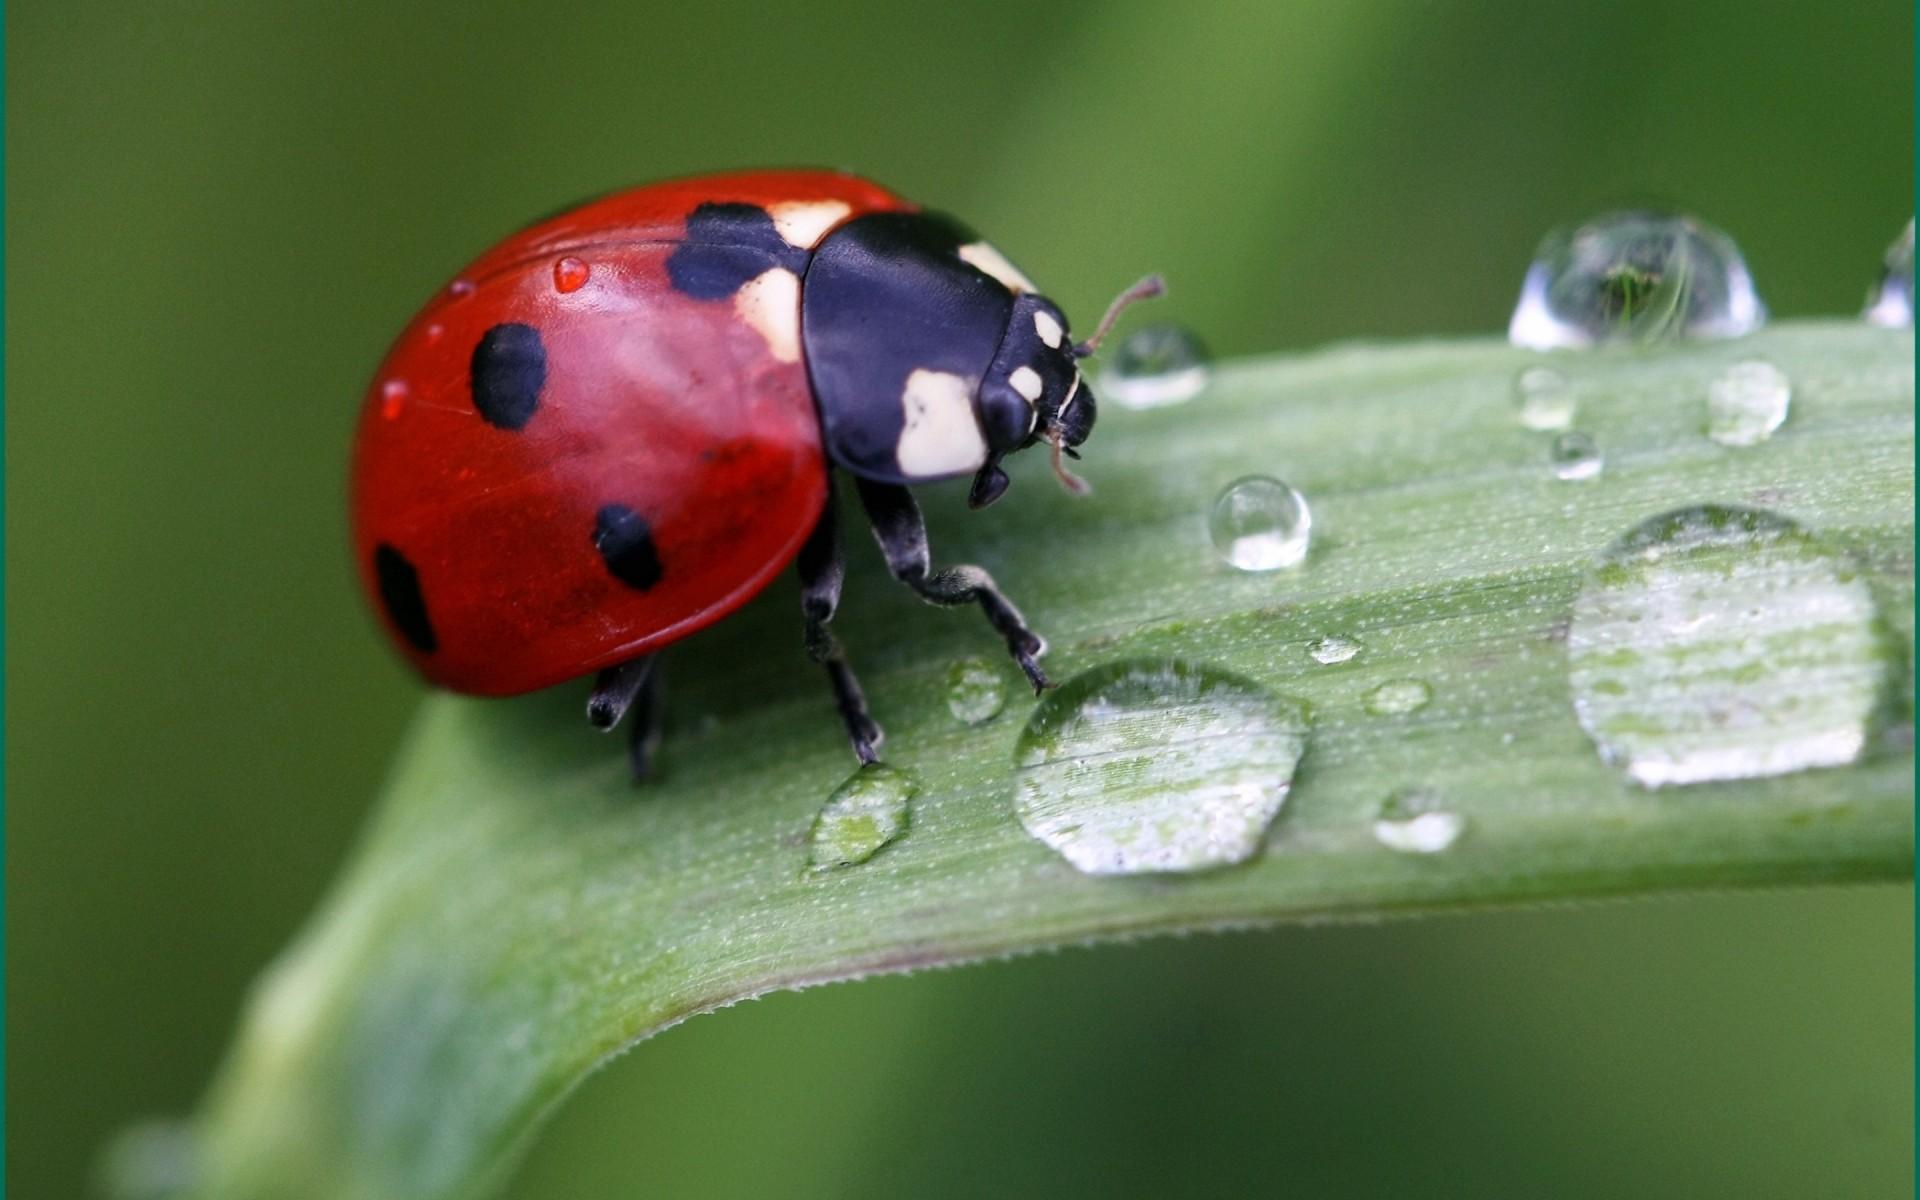 Cute Ladybird. Android wallpaper for free